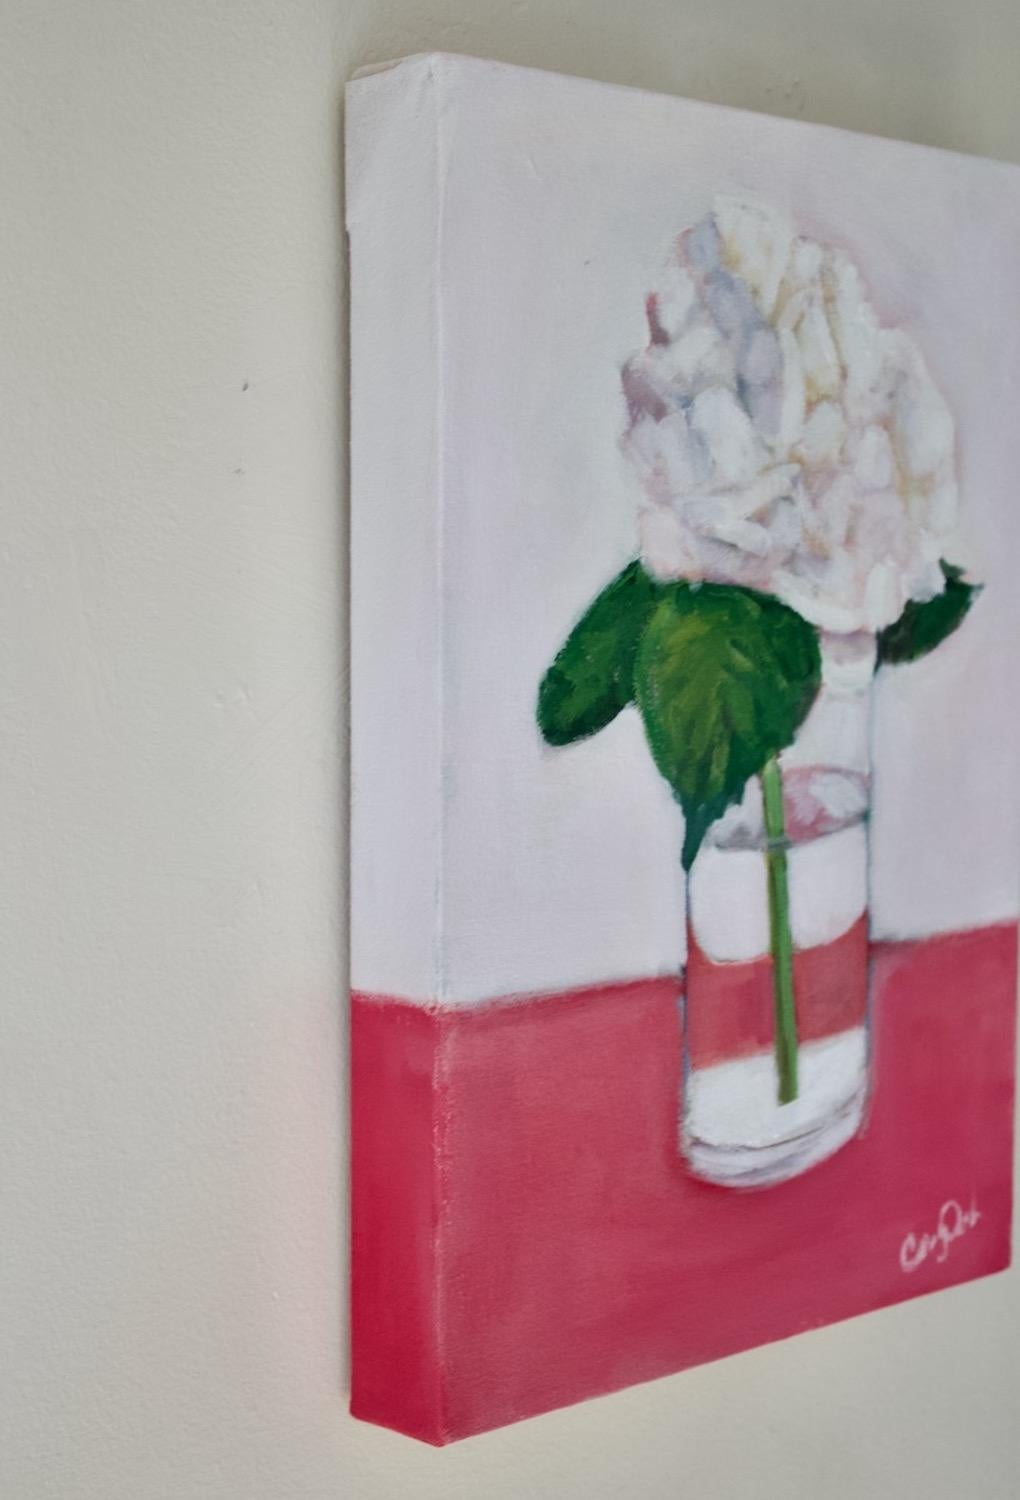 <p>Artist Comments<br>Artist Carey Parks illustrates a single hydrangea in a glass vase imposed on a background with a similar hue. Her impressionist style depicts the petals and leaves with a soft velvety feel. She takes inspiration from an almost